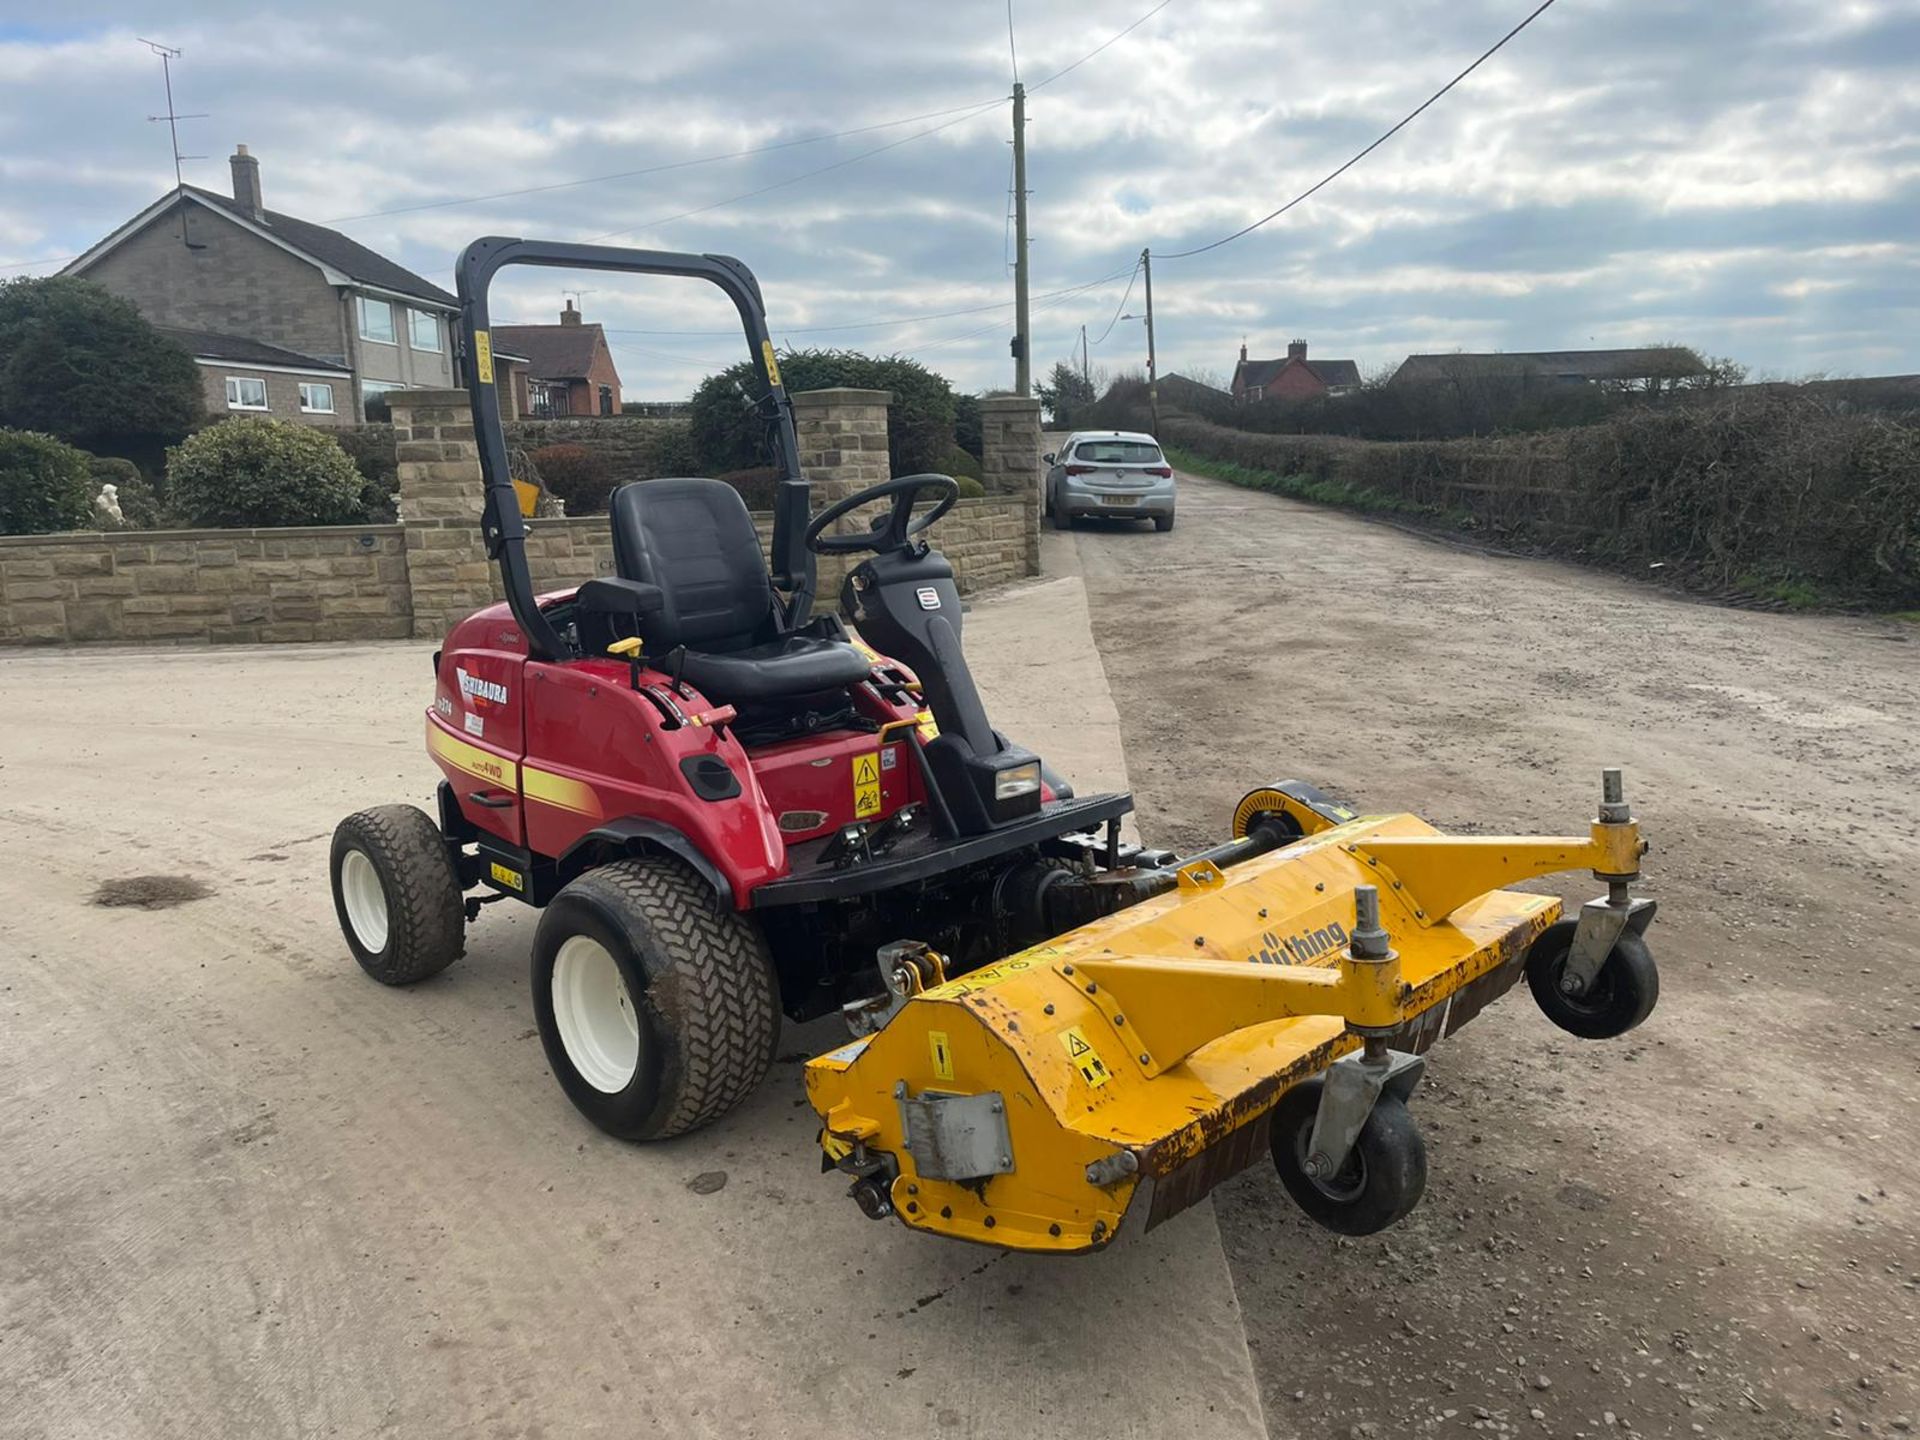 2014 SHIBAURA CM374 OUTFRONT MOWER, RUNS, DRIVES, CUTS, LOW 1450 HOURS *PLUS VAT* - Image 3 of 10